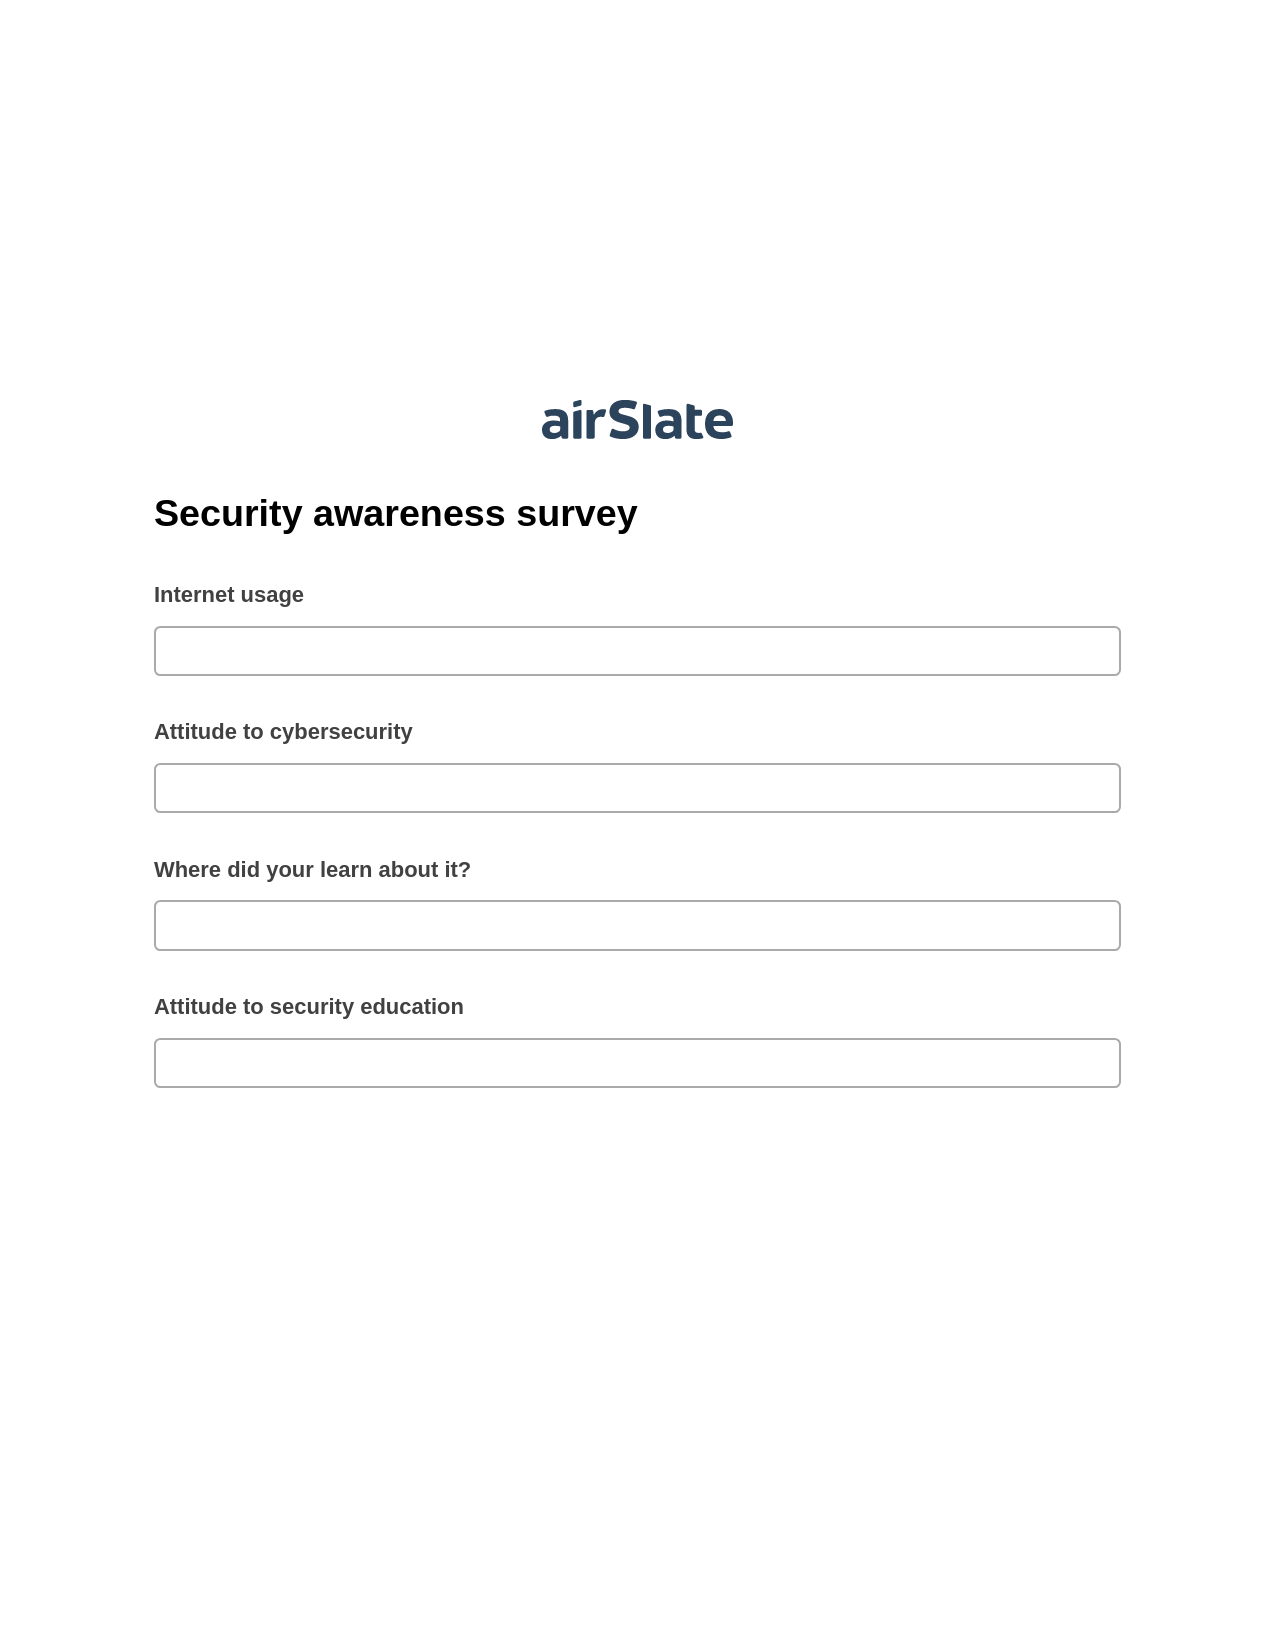 Security awareness survey Pre-fill from another Slate Bot, Open as Role Bot, Google Drive Bot